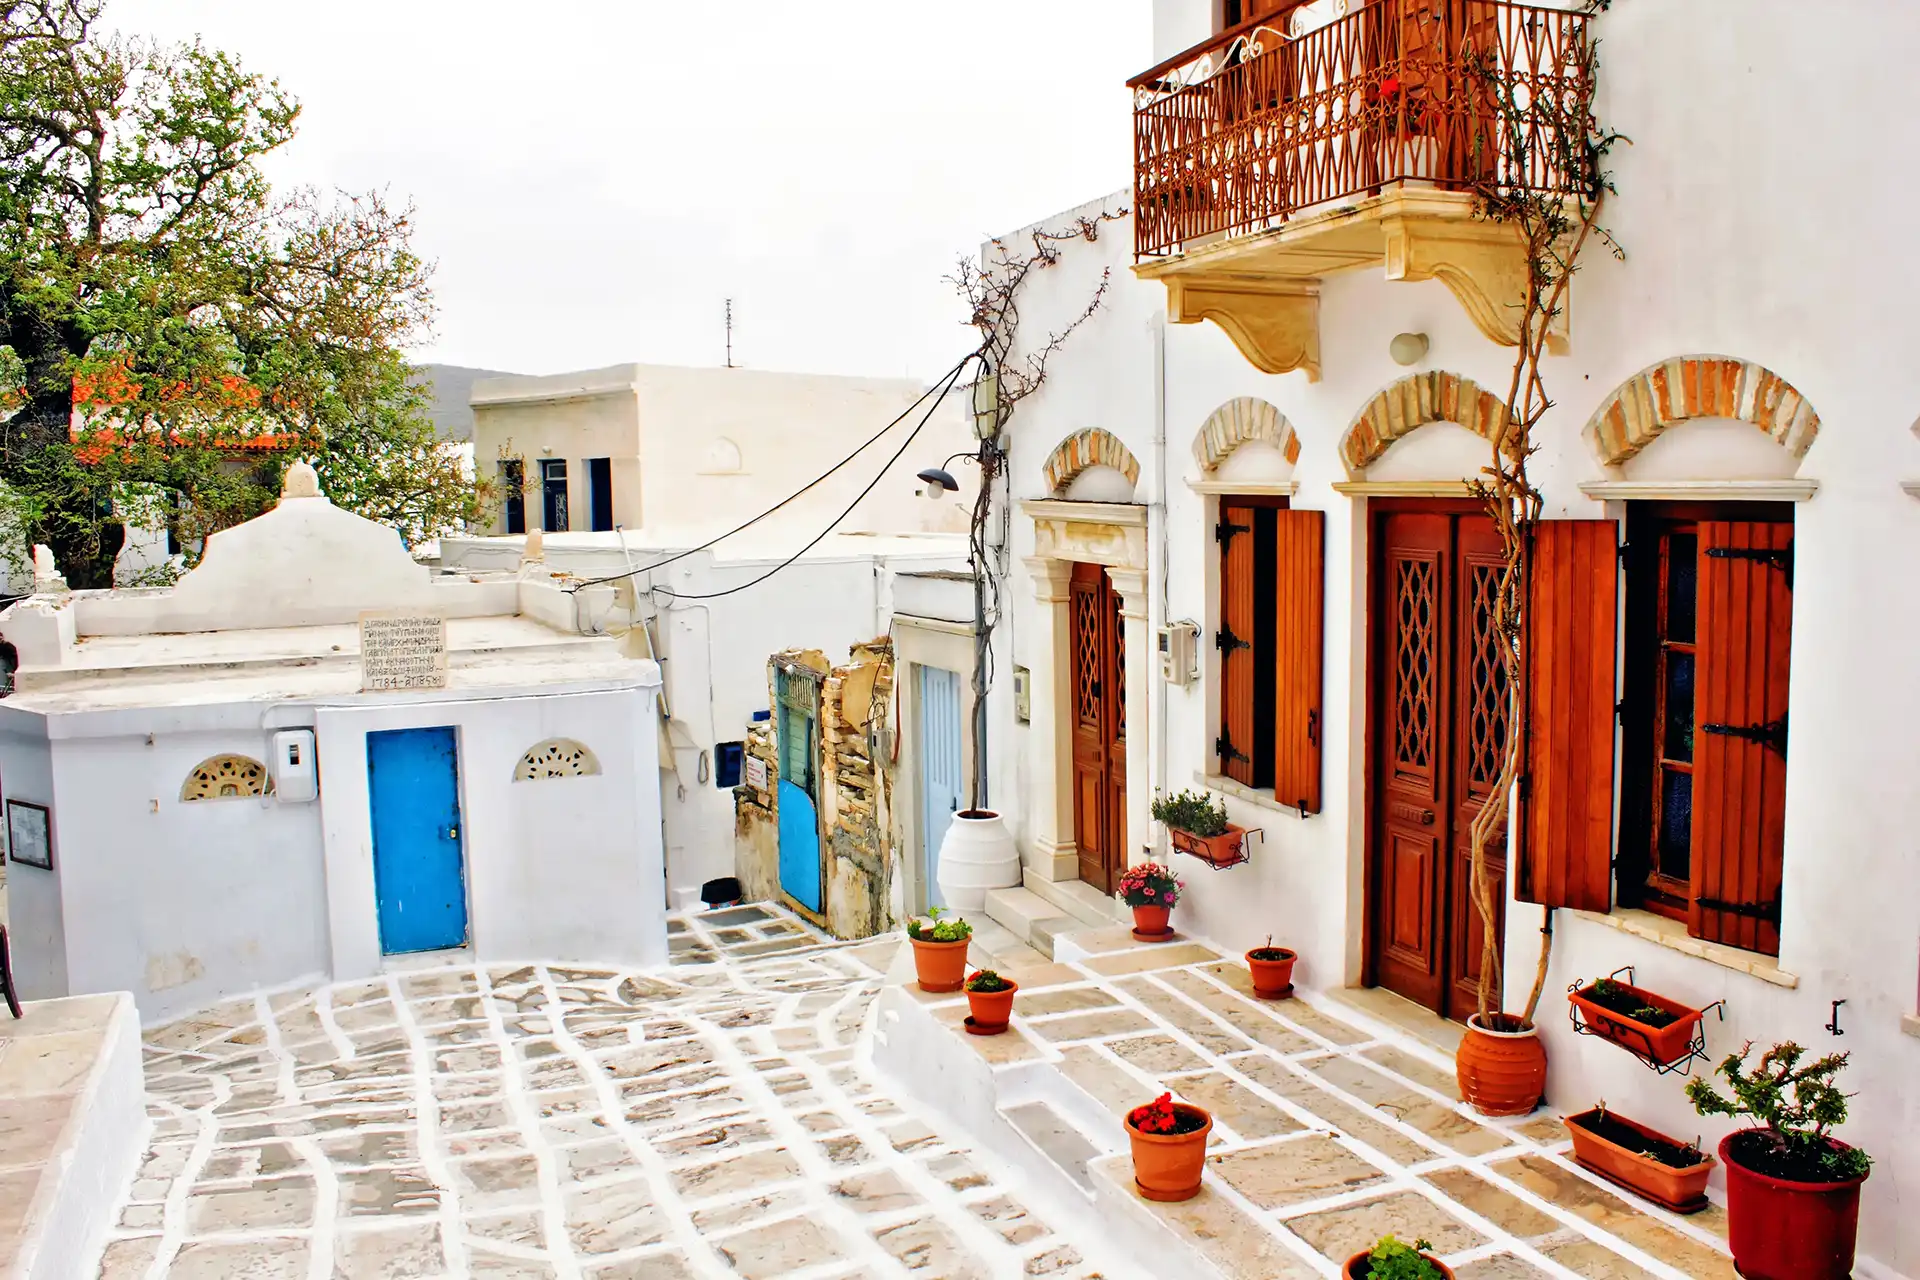 Street scenery at the old village of Pyrgos in Tinos island, Cyclades, Greece.